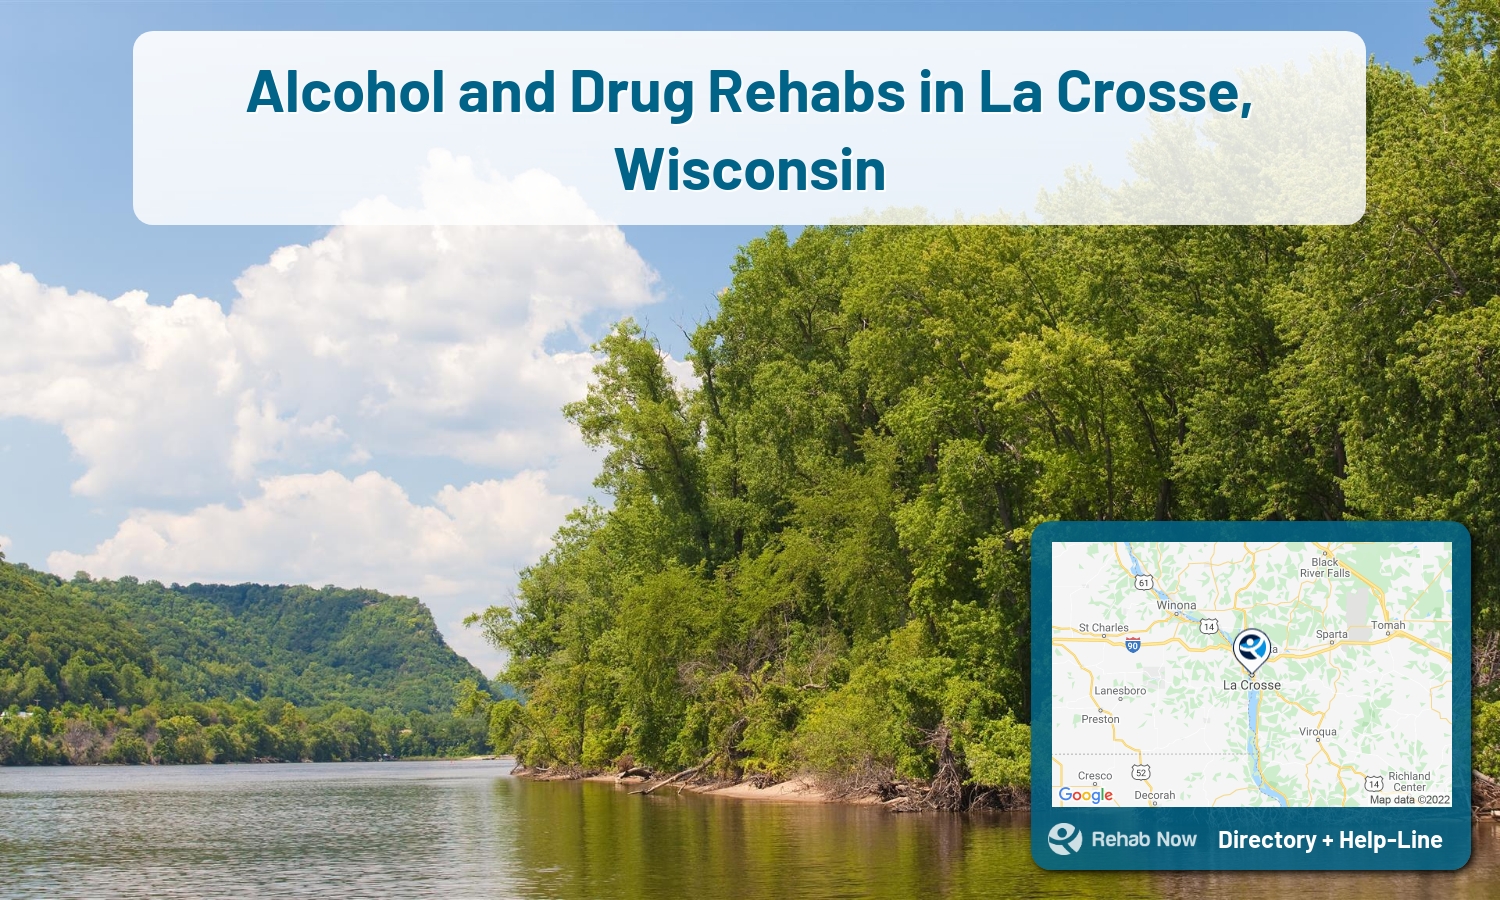 Ready to pick a rehab center in La Crosse? Get off alcohol, opiates, and other drugs, by selecting top drug rehab centers in Wisconsin